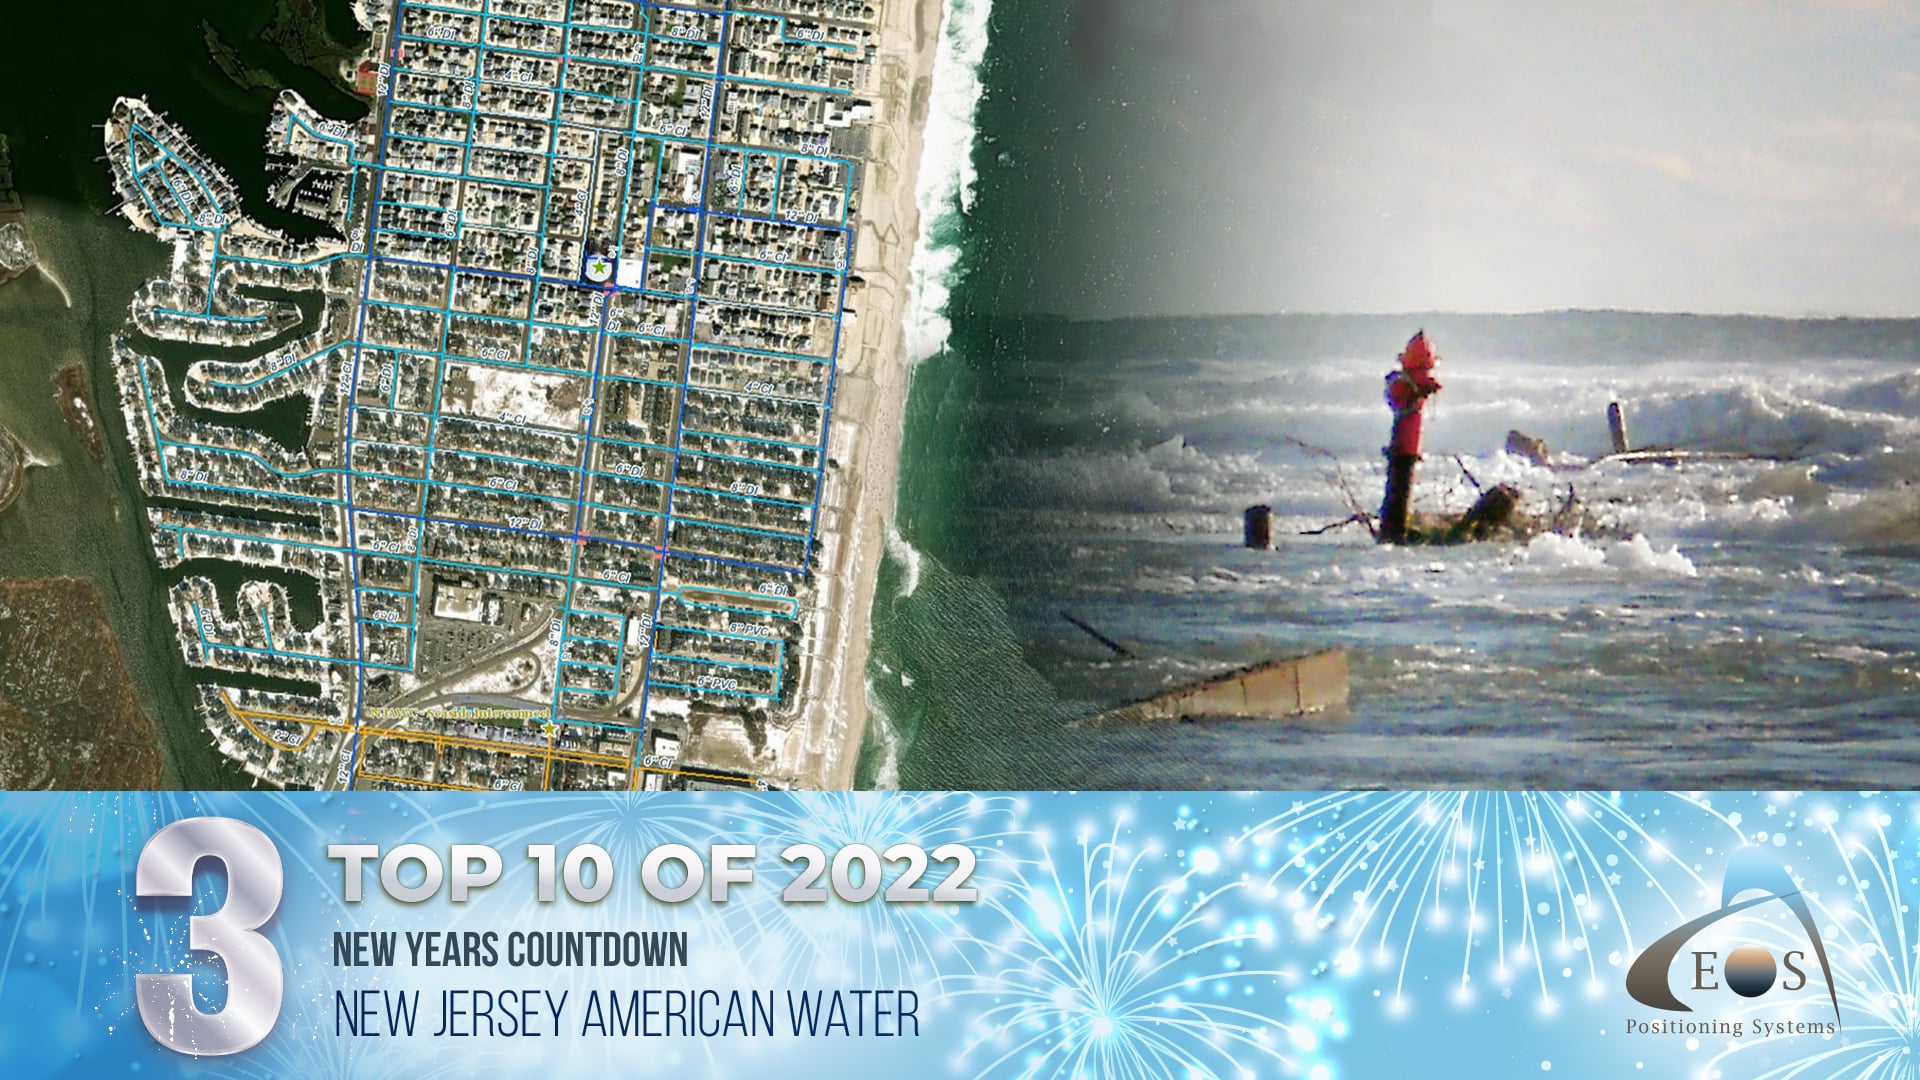 3 New Jersey American Water - Top 10 of 2022